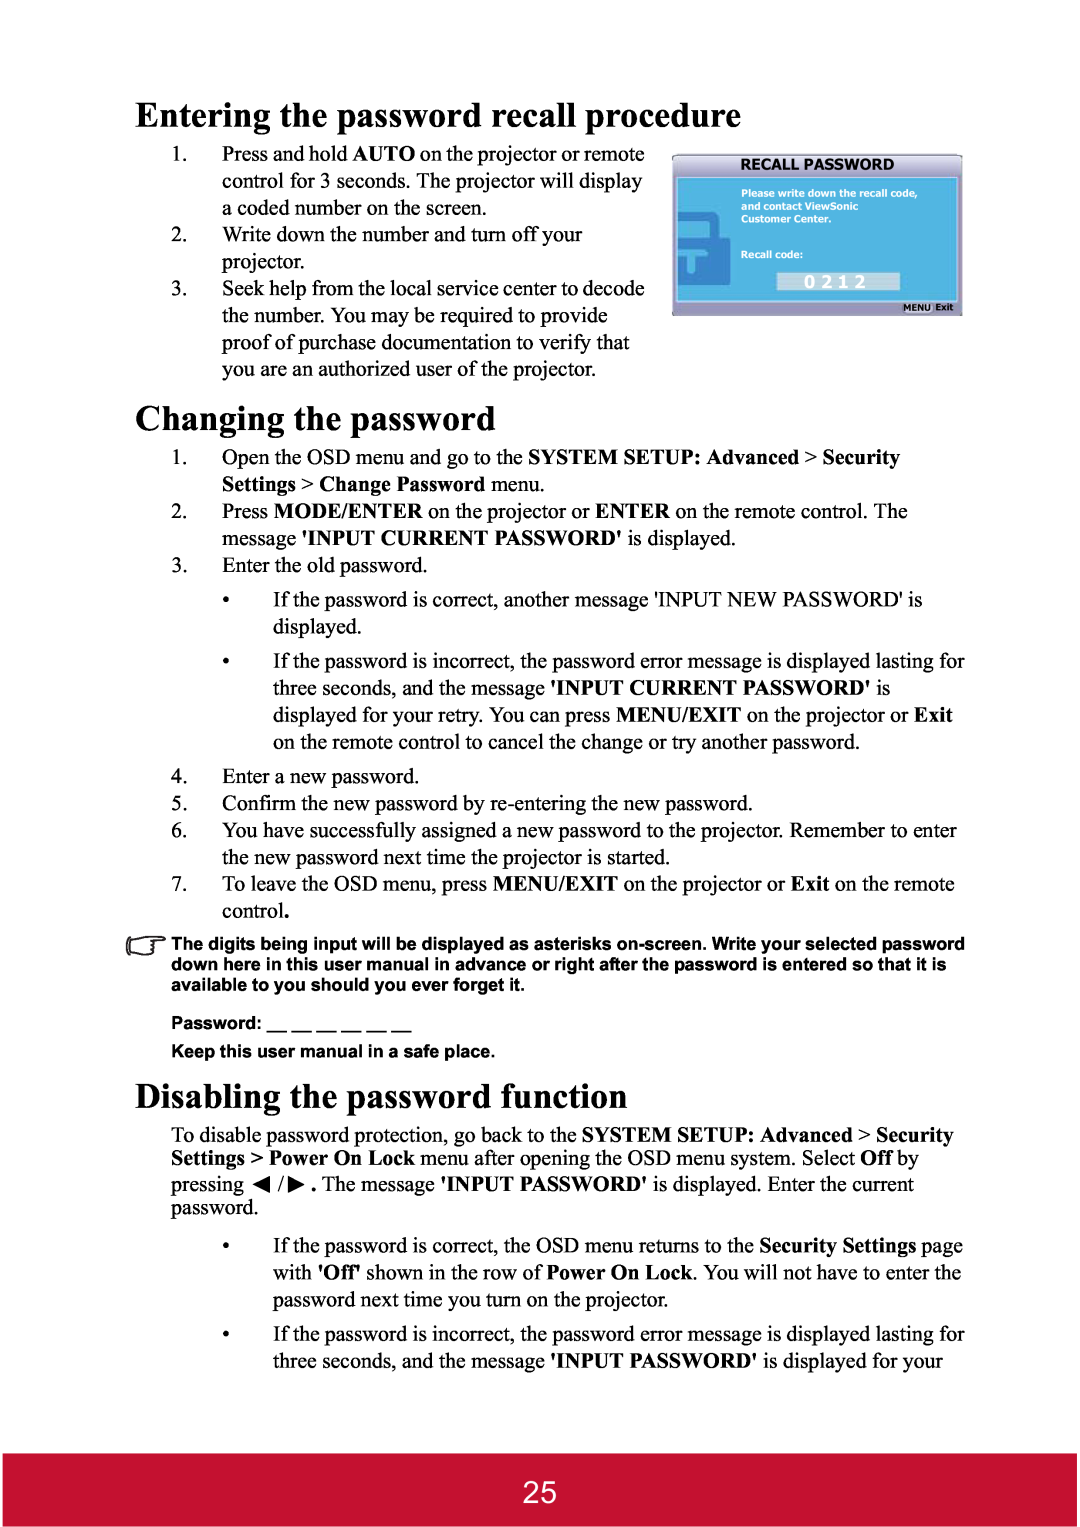 ViewSonic PJD7382, PJD7400W Entering the password recall procedure, Changing the password, Disabling the password function 